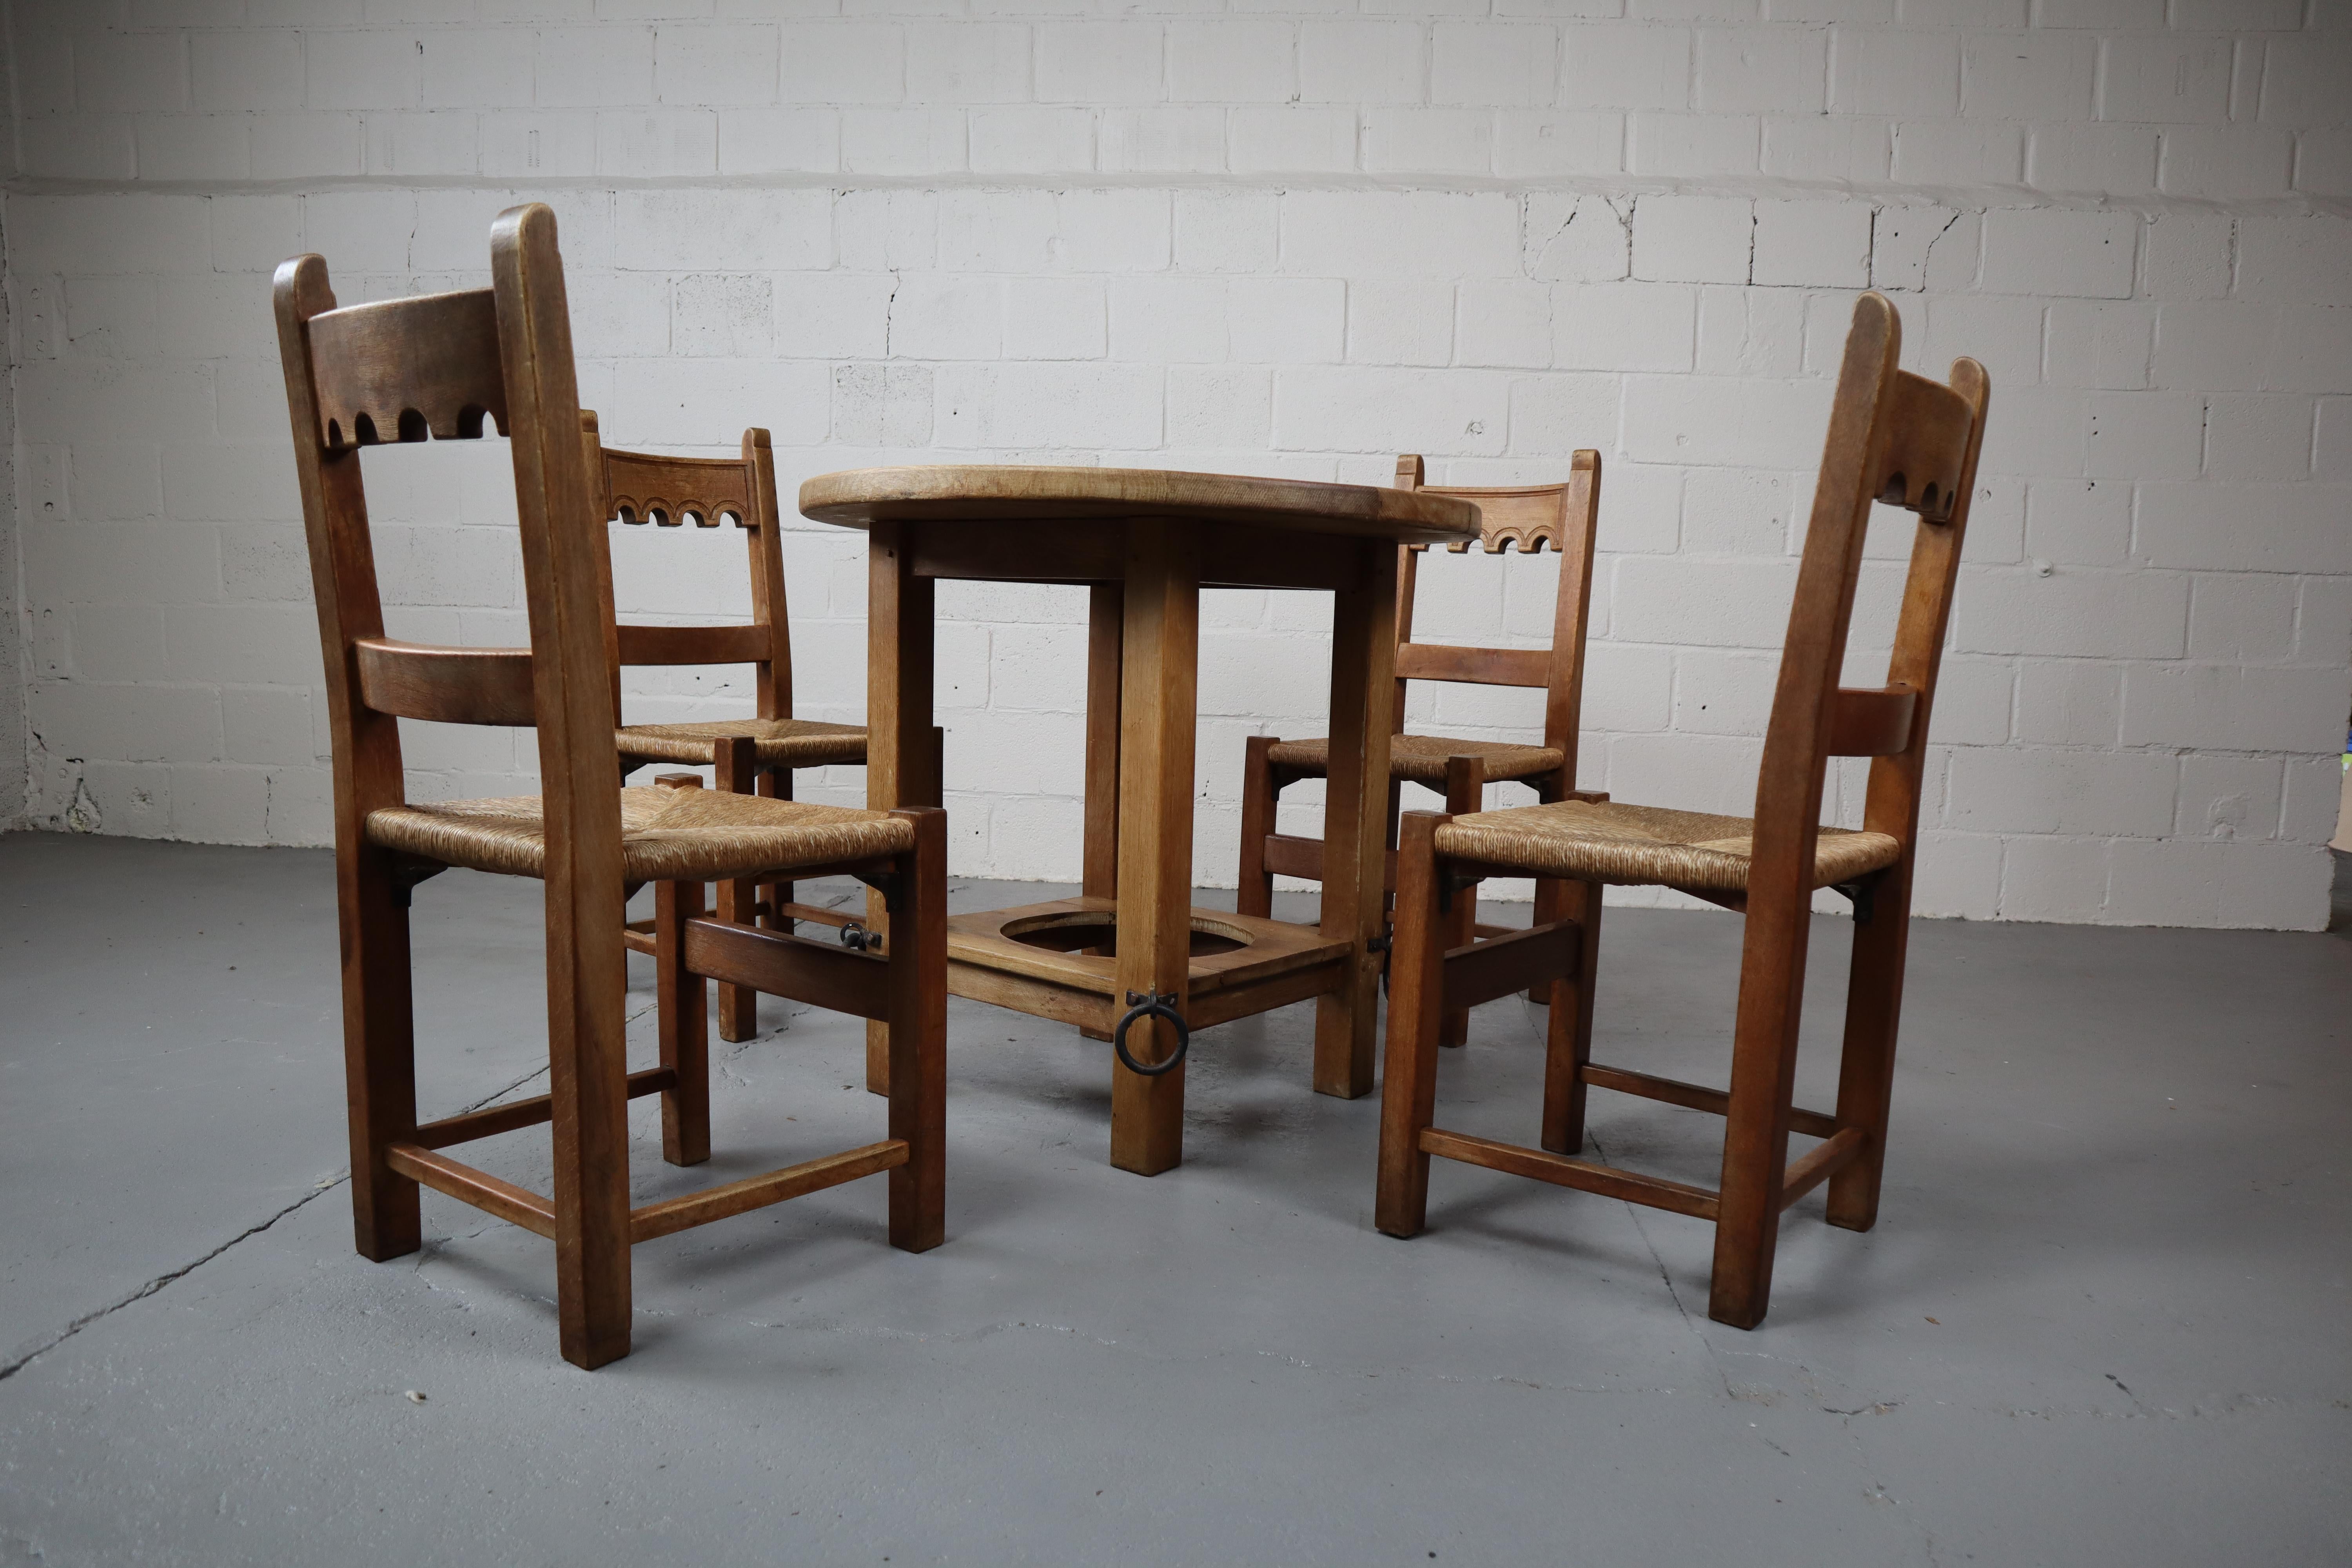 Sturdy and heavy brutalist oak dining room set consisting of a round table with four chairs.

chair: 48x90x42 cm seatheight 45 cm
table: dia 90cm  height 81 cm